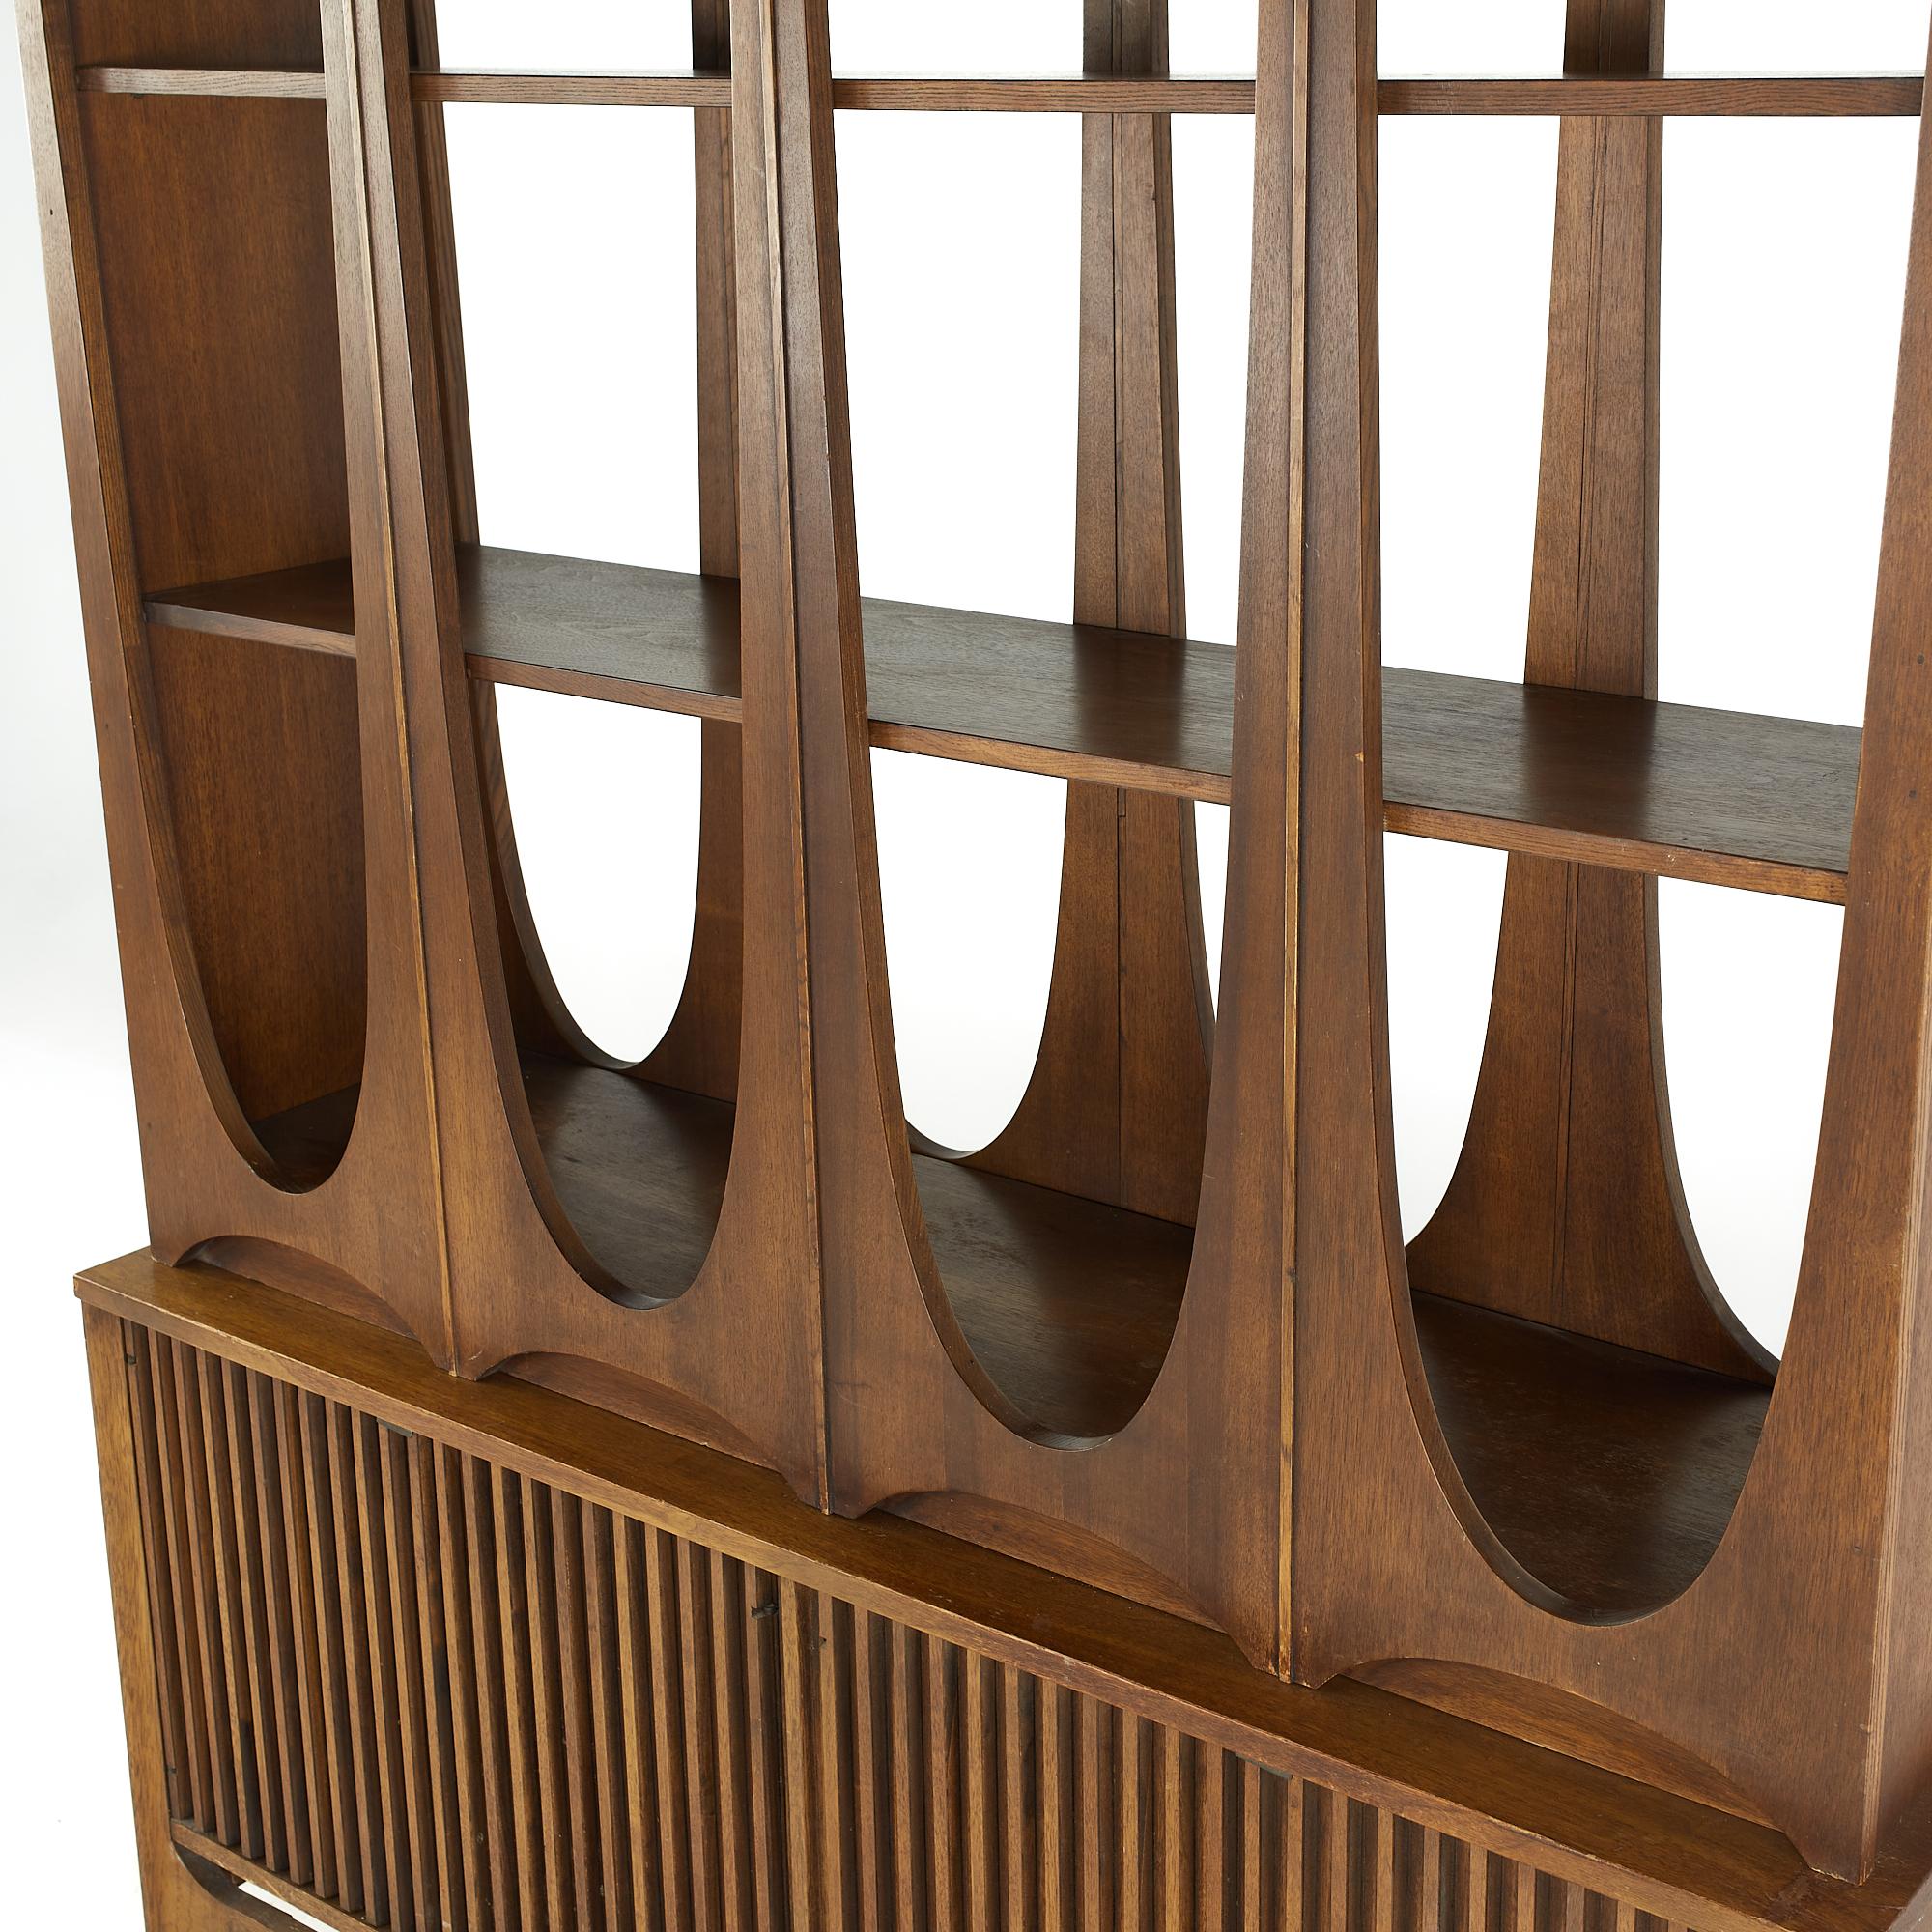 Broyhill Brasilia Midcentury Walnut Room Divider In Good Condition For Sale In Countryside, IL